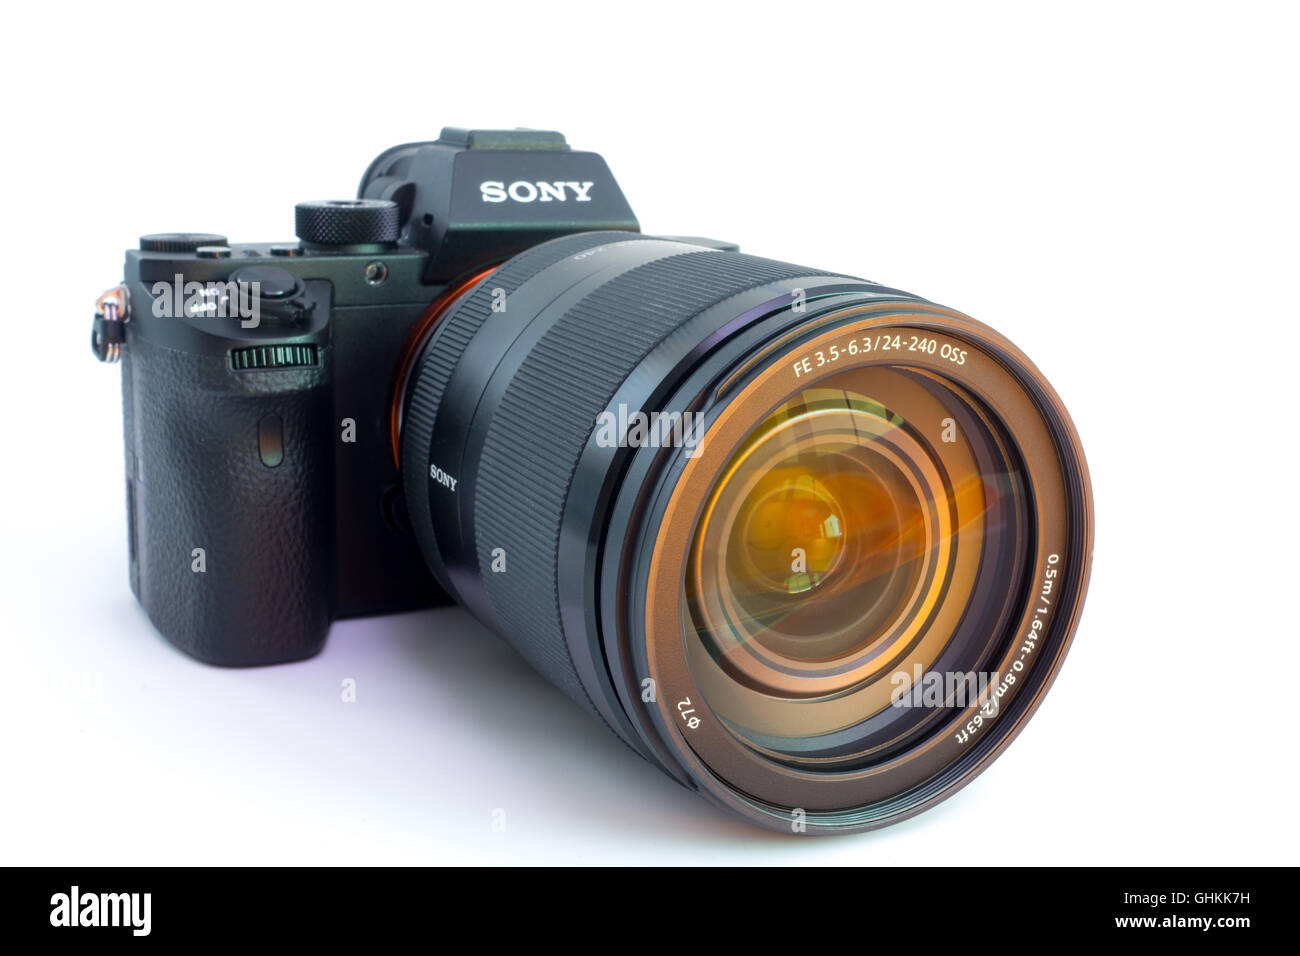 27. 10. 2015, BERLIN, GERMANY:  Sony Alpha a7R II ILCE-7RM2 Mirrorless Digital Camera (Body Only) without lens. With a world's Stock Photo